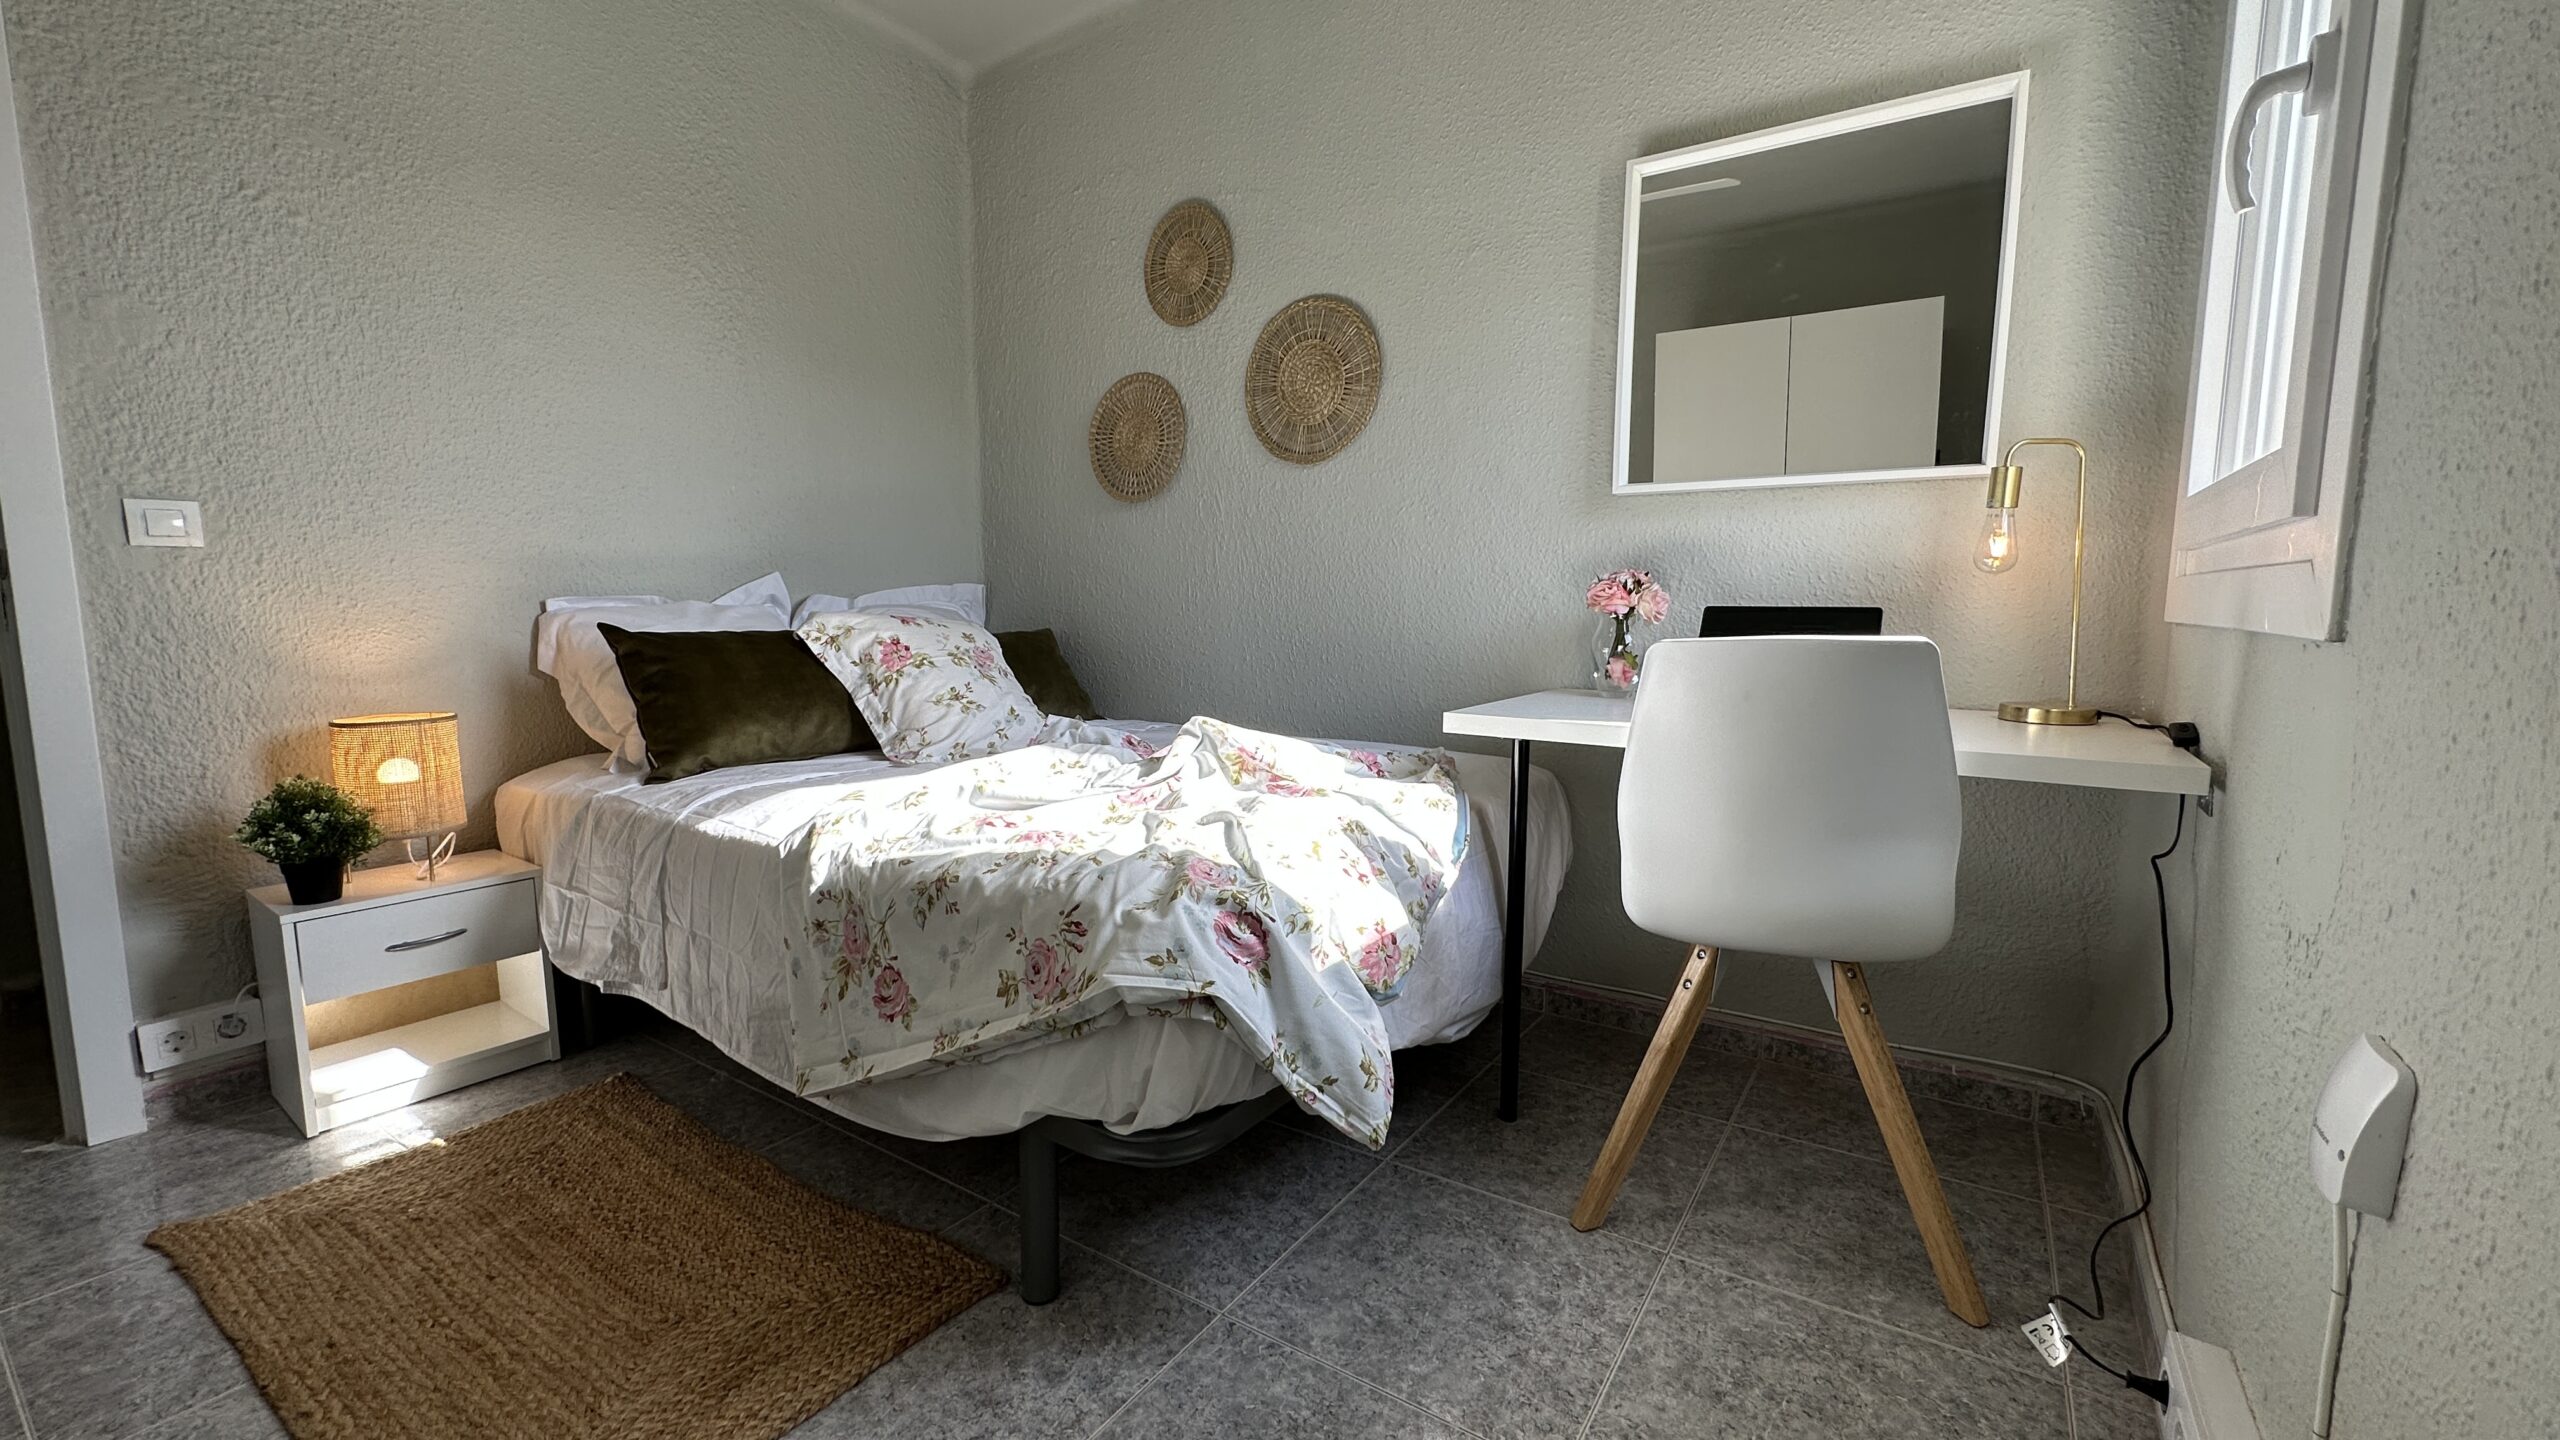 1017705. Brand new student flat in Sabadell. Centrally located, 4 minutes walk from the Catalan railways, station “Sabadell Nord”.